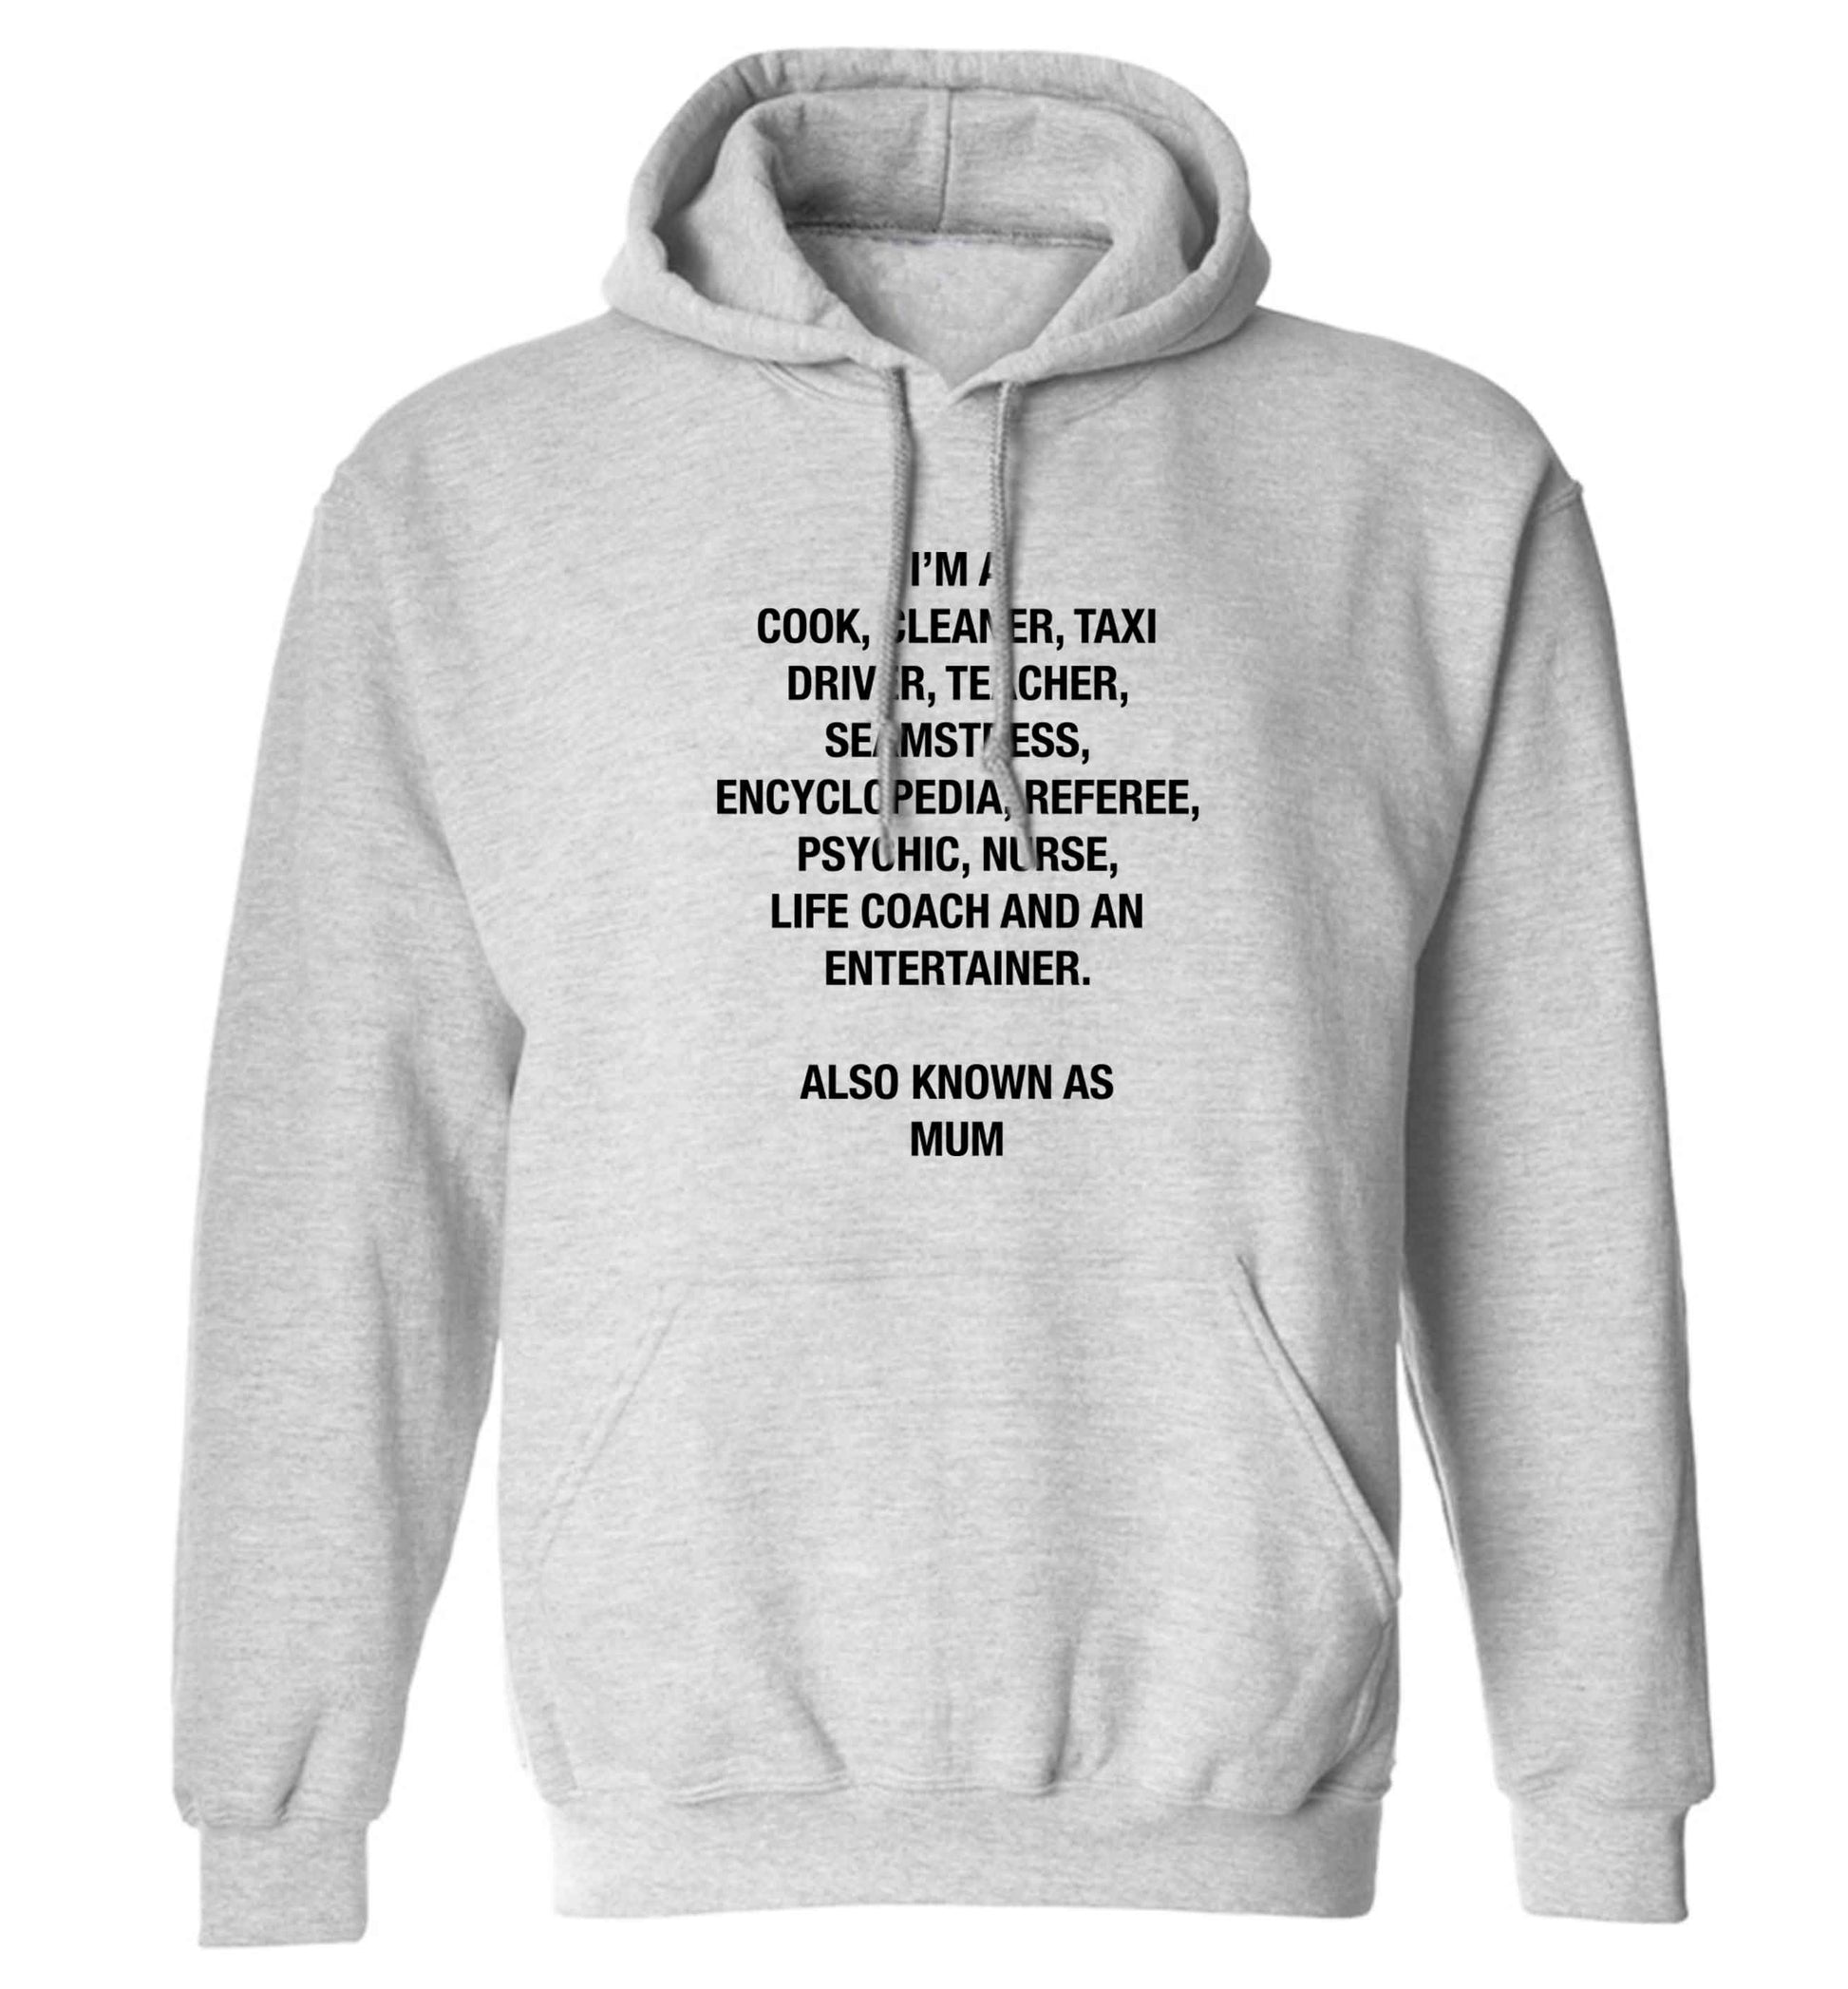 Funny gifts for your mum on mother's dayor her birthday! Mum, cook, cleaner, taxi driver, teacher, seamstress, encyclopedia, referee, psychic, nurse, life coach and entertainer adults unisex grey hoodie 2XL